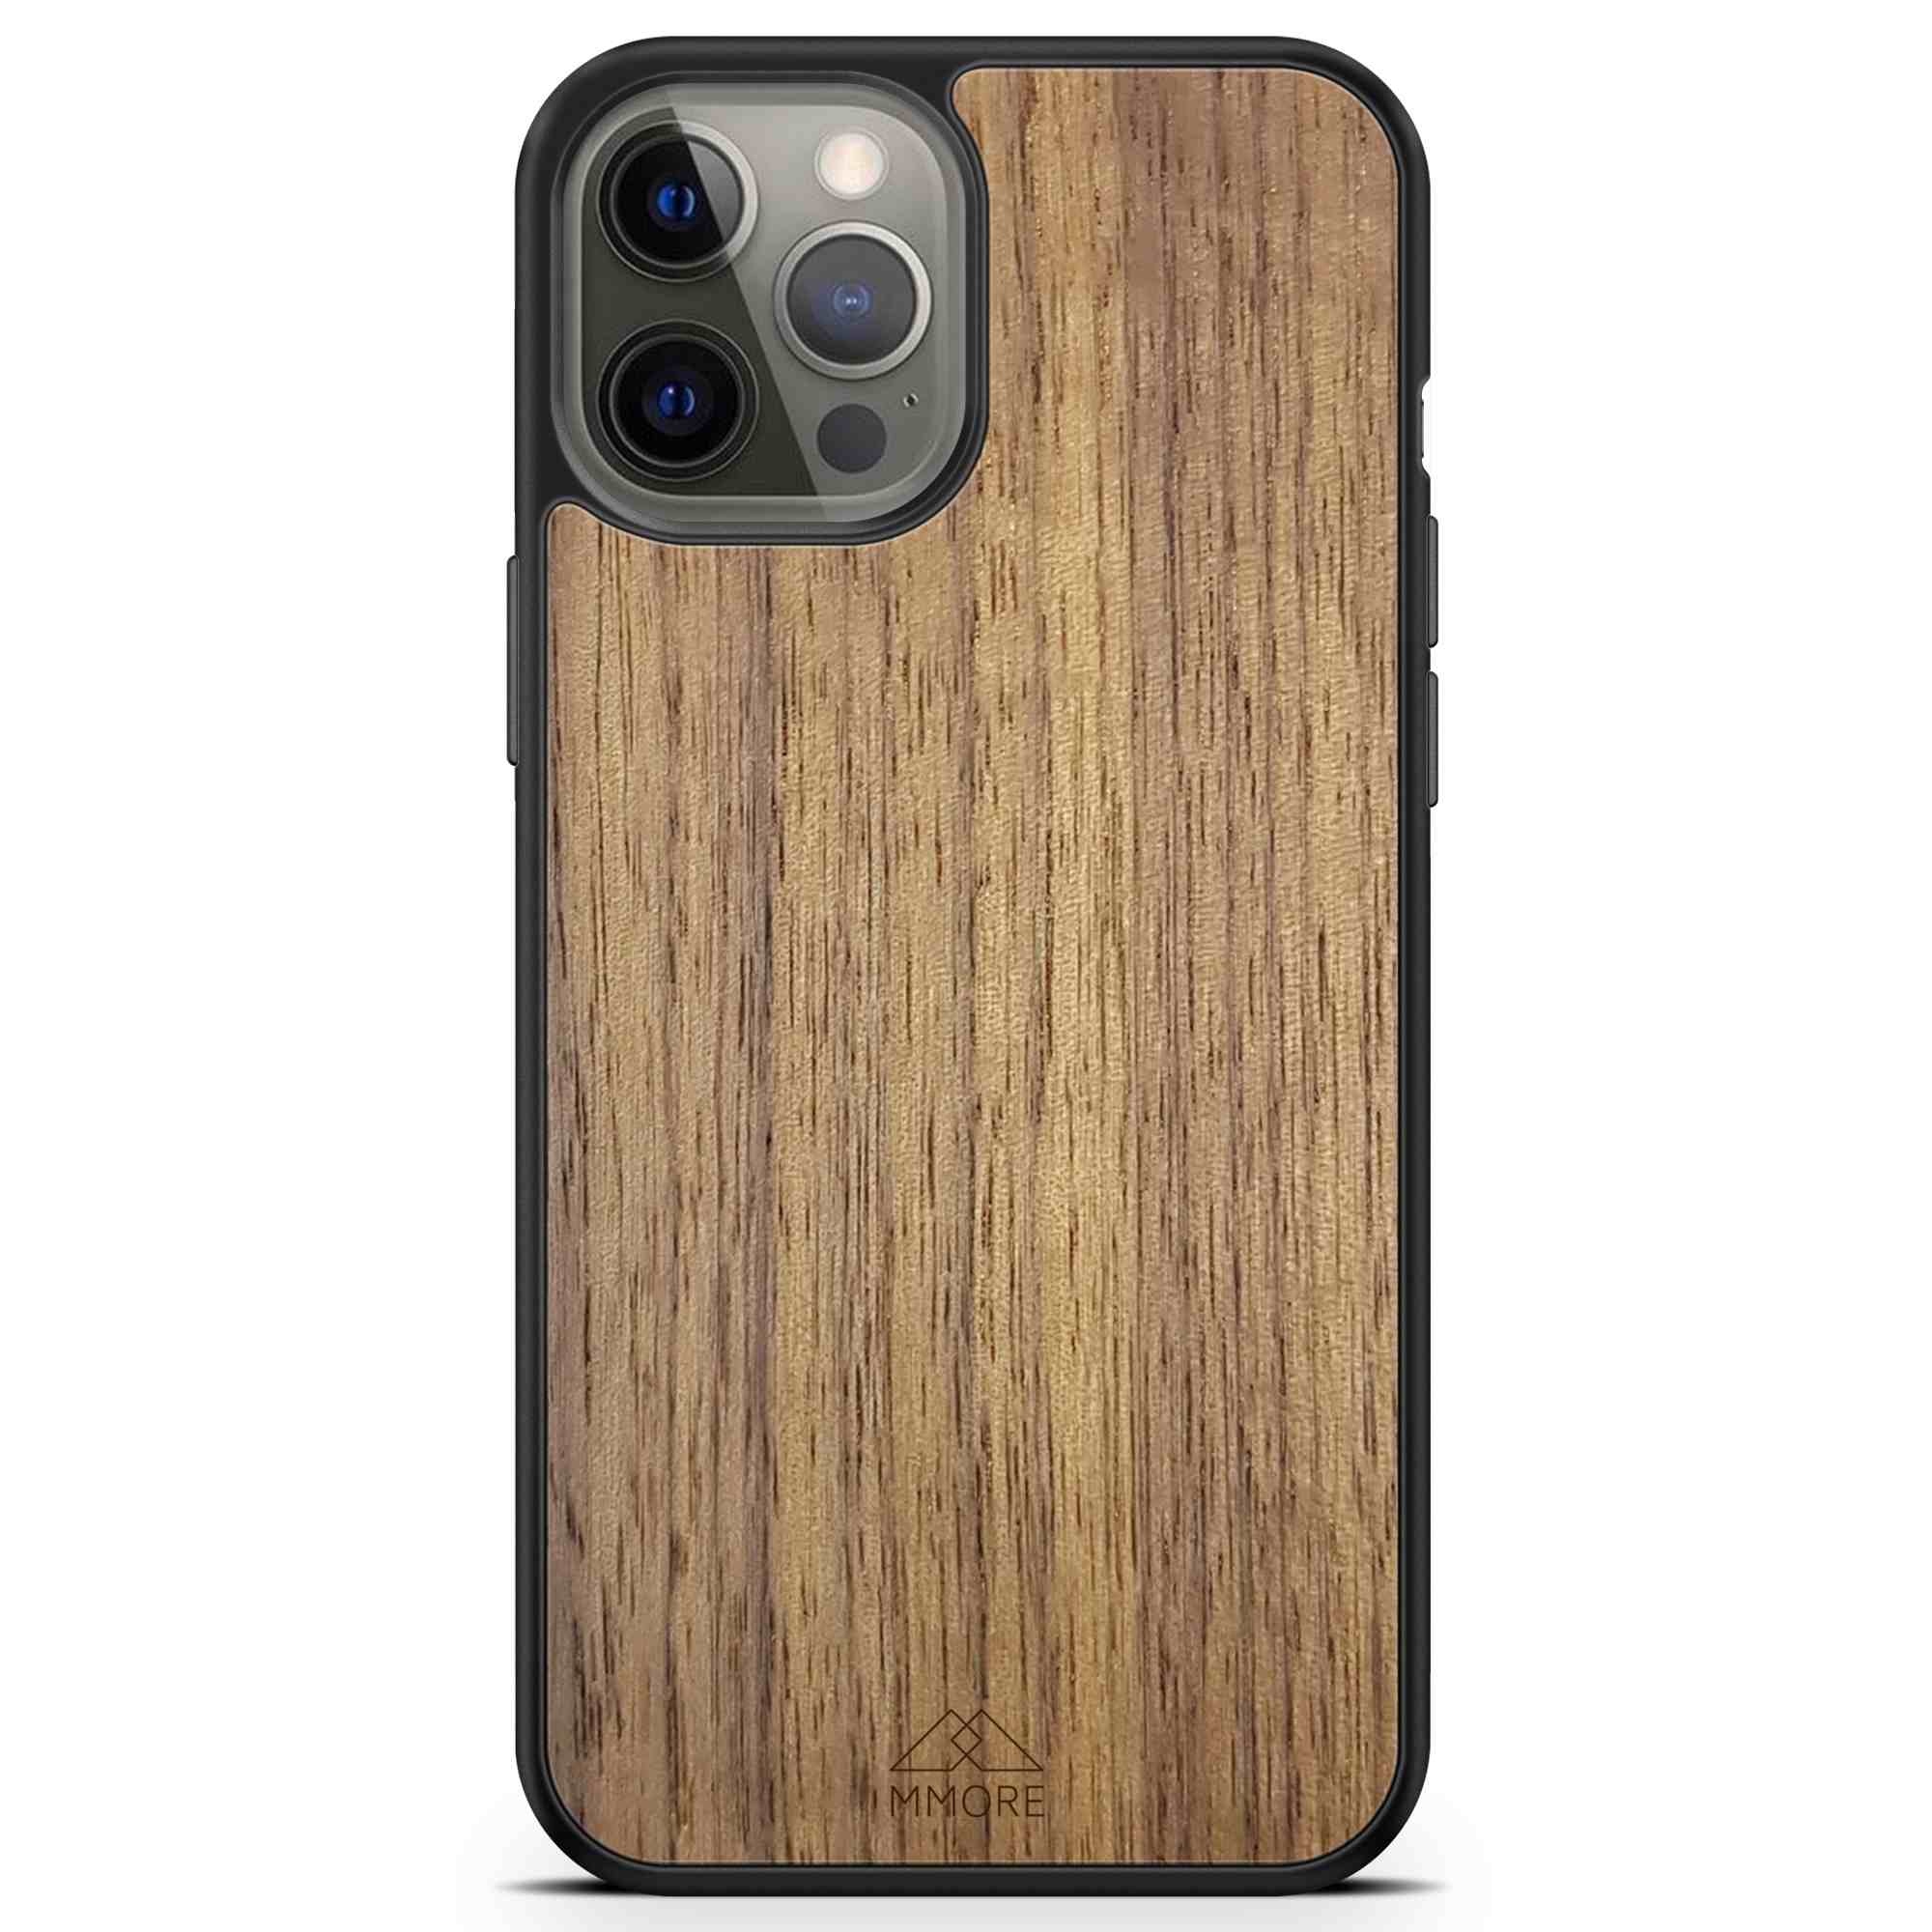 Google Pixel 8 Pro Wood Case, Hand Made in USA